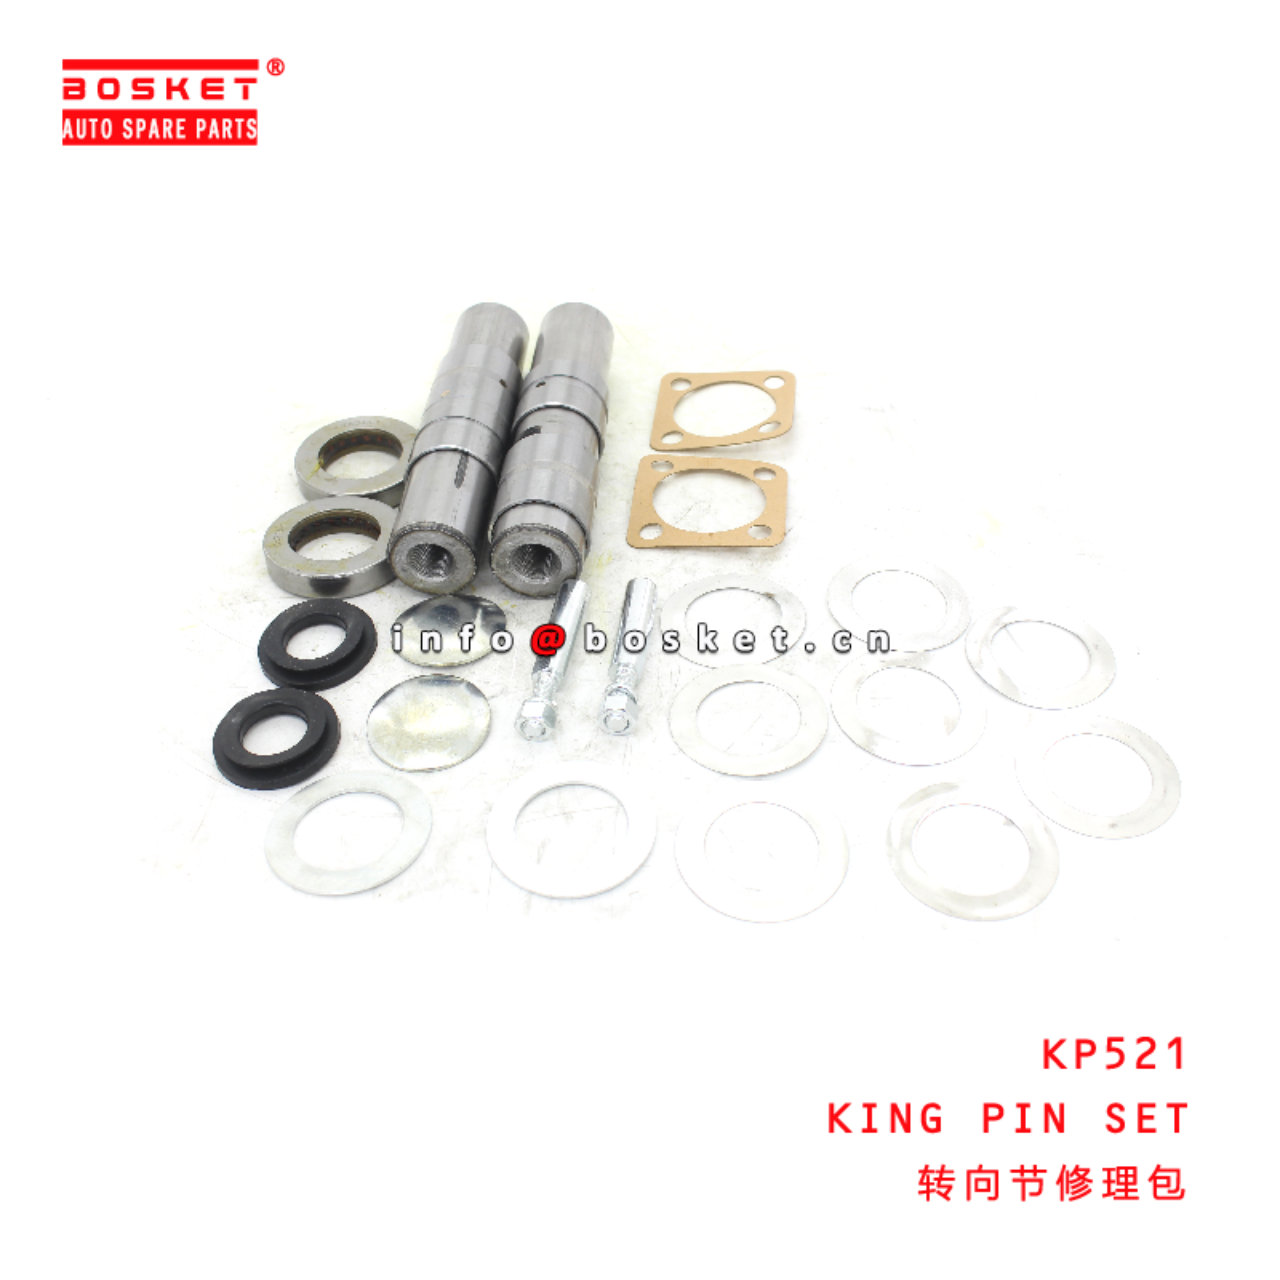 1098002640 1-09800264-0 Bearing Case Ball Bearing Suitable for 